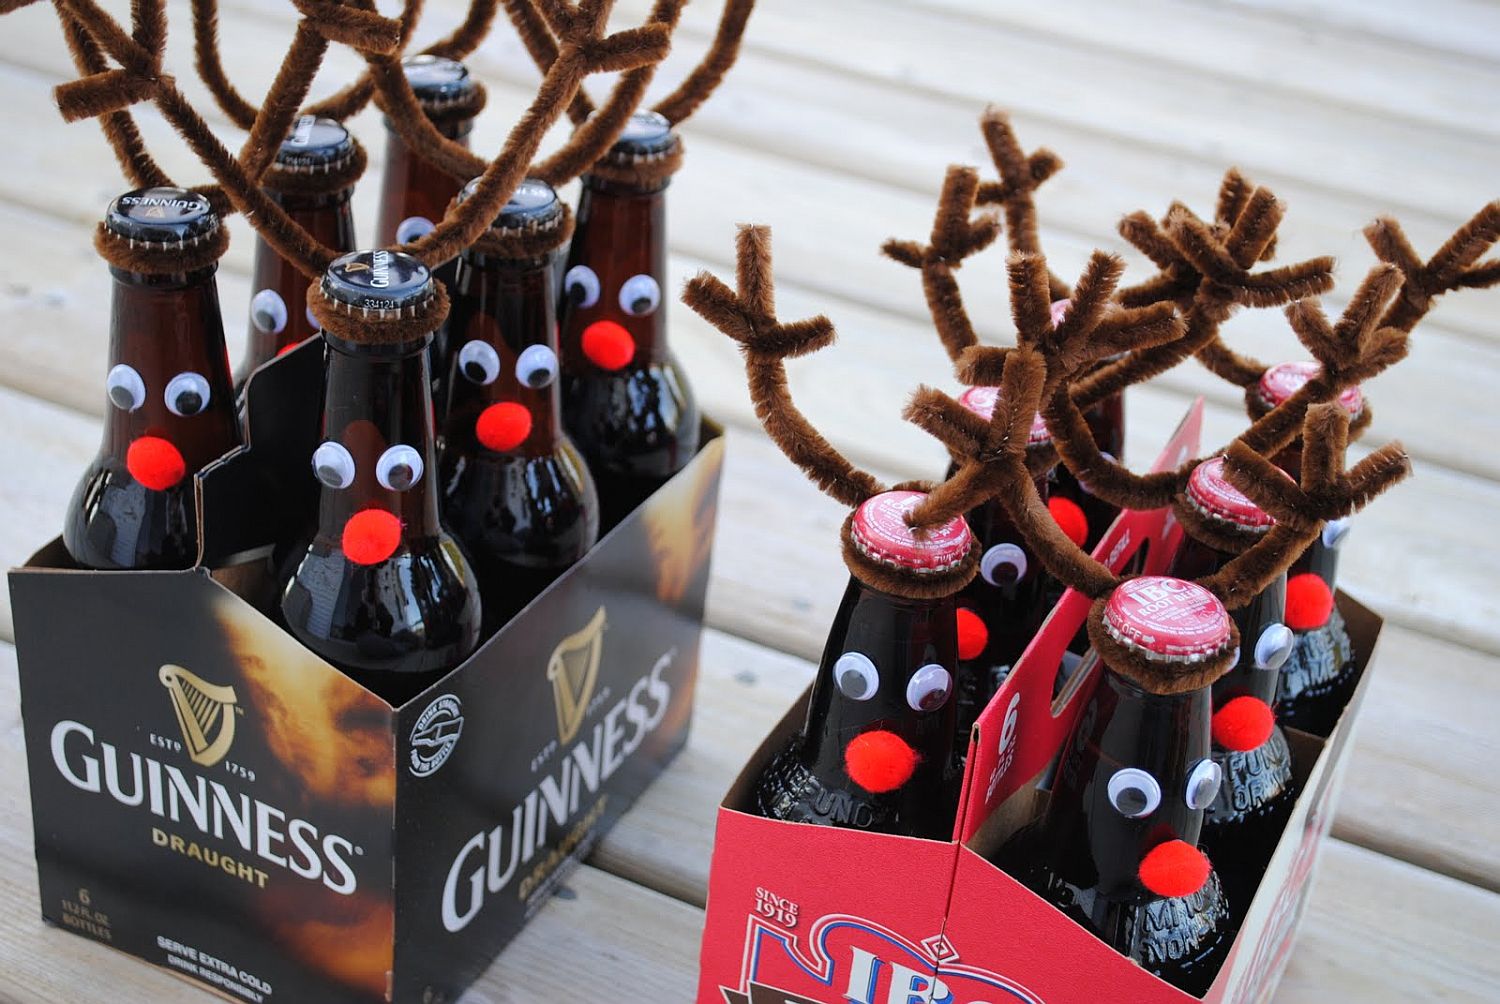 Homemade beer bottle reindeers also make great gifts for friends